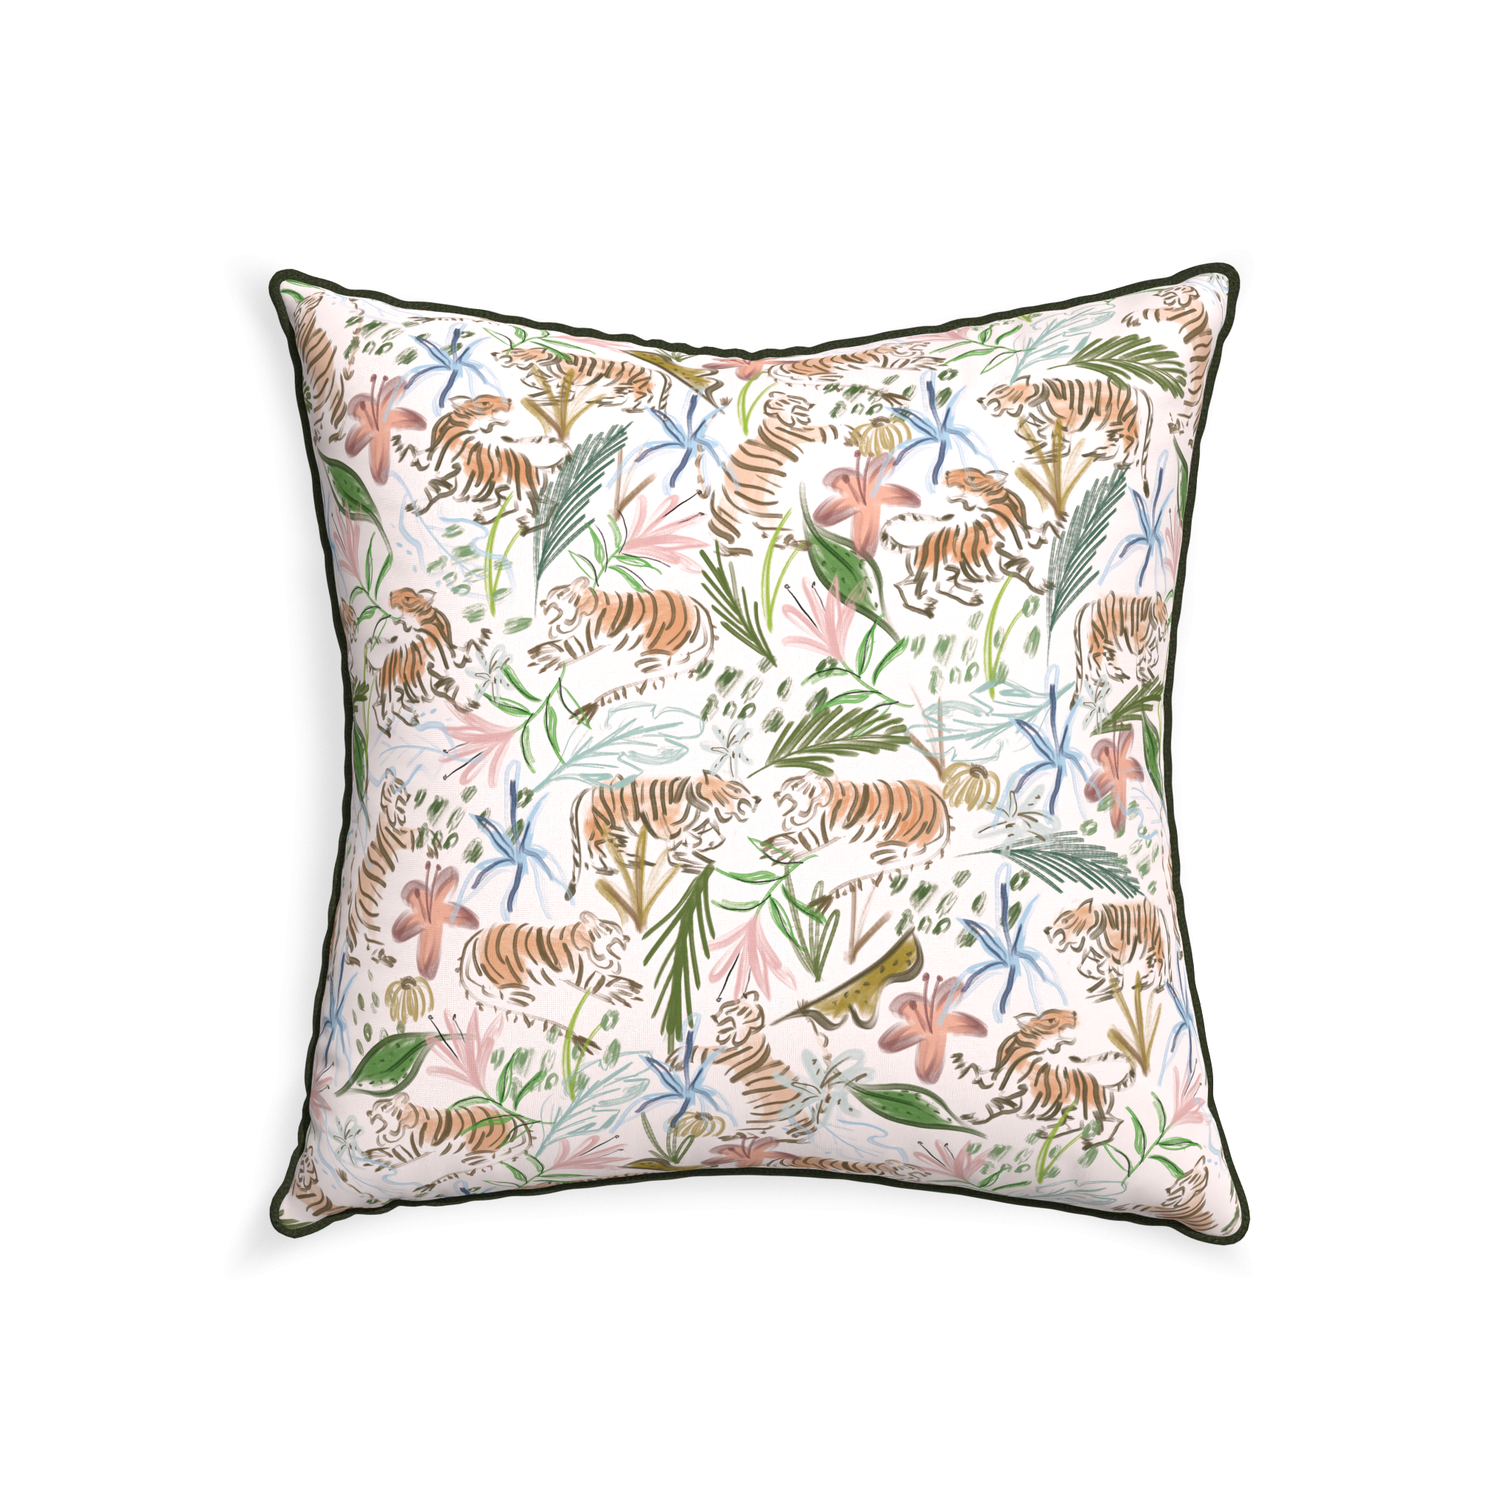 22-square frida pink custom pink chinoiserie tigerpillow with f piping on white background